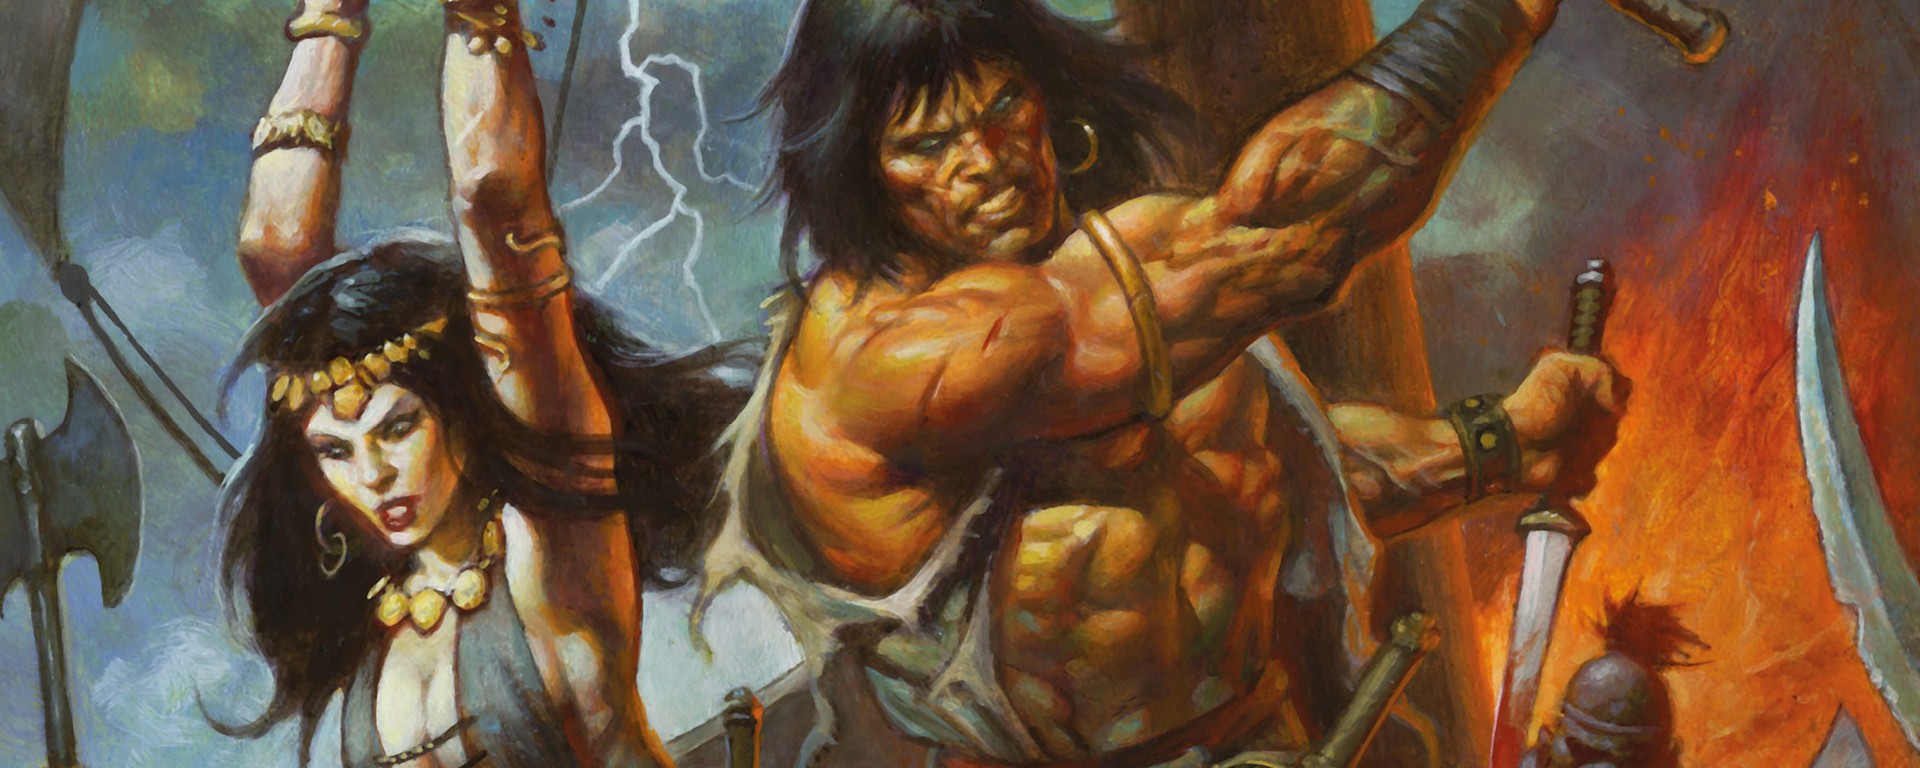 Conan the Barbarian 7 Alex Horley Cover Cropped